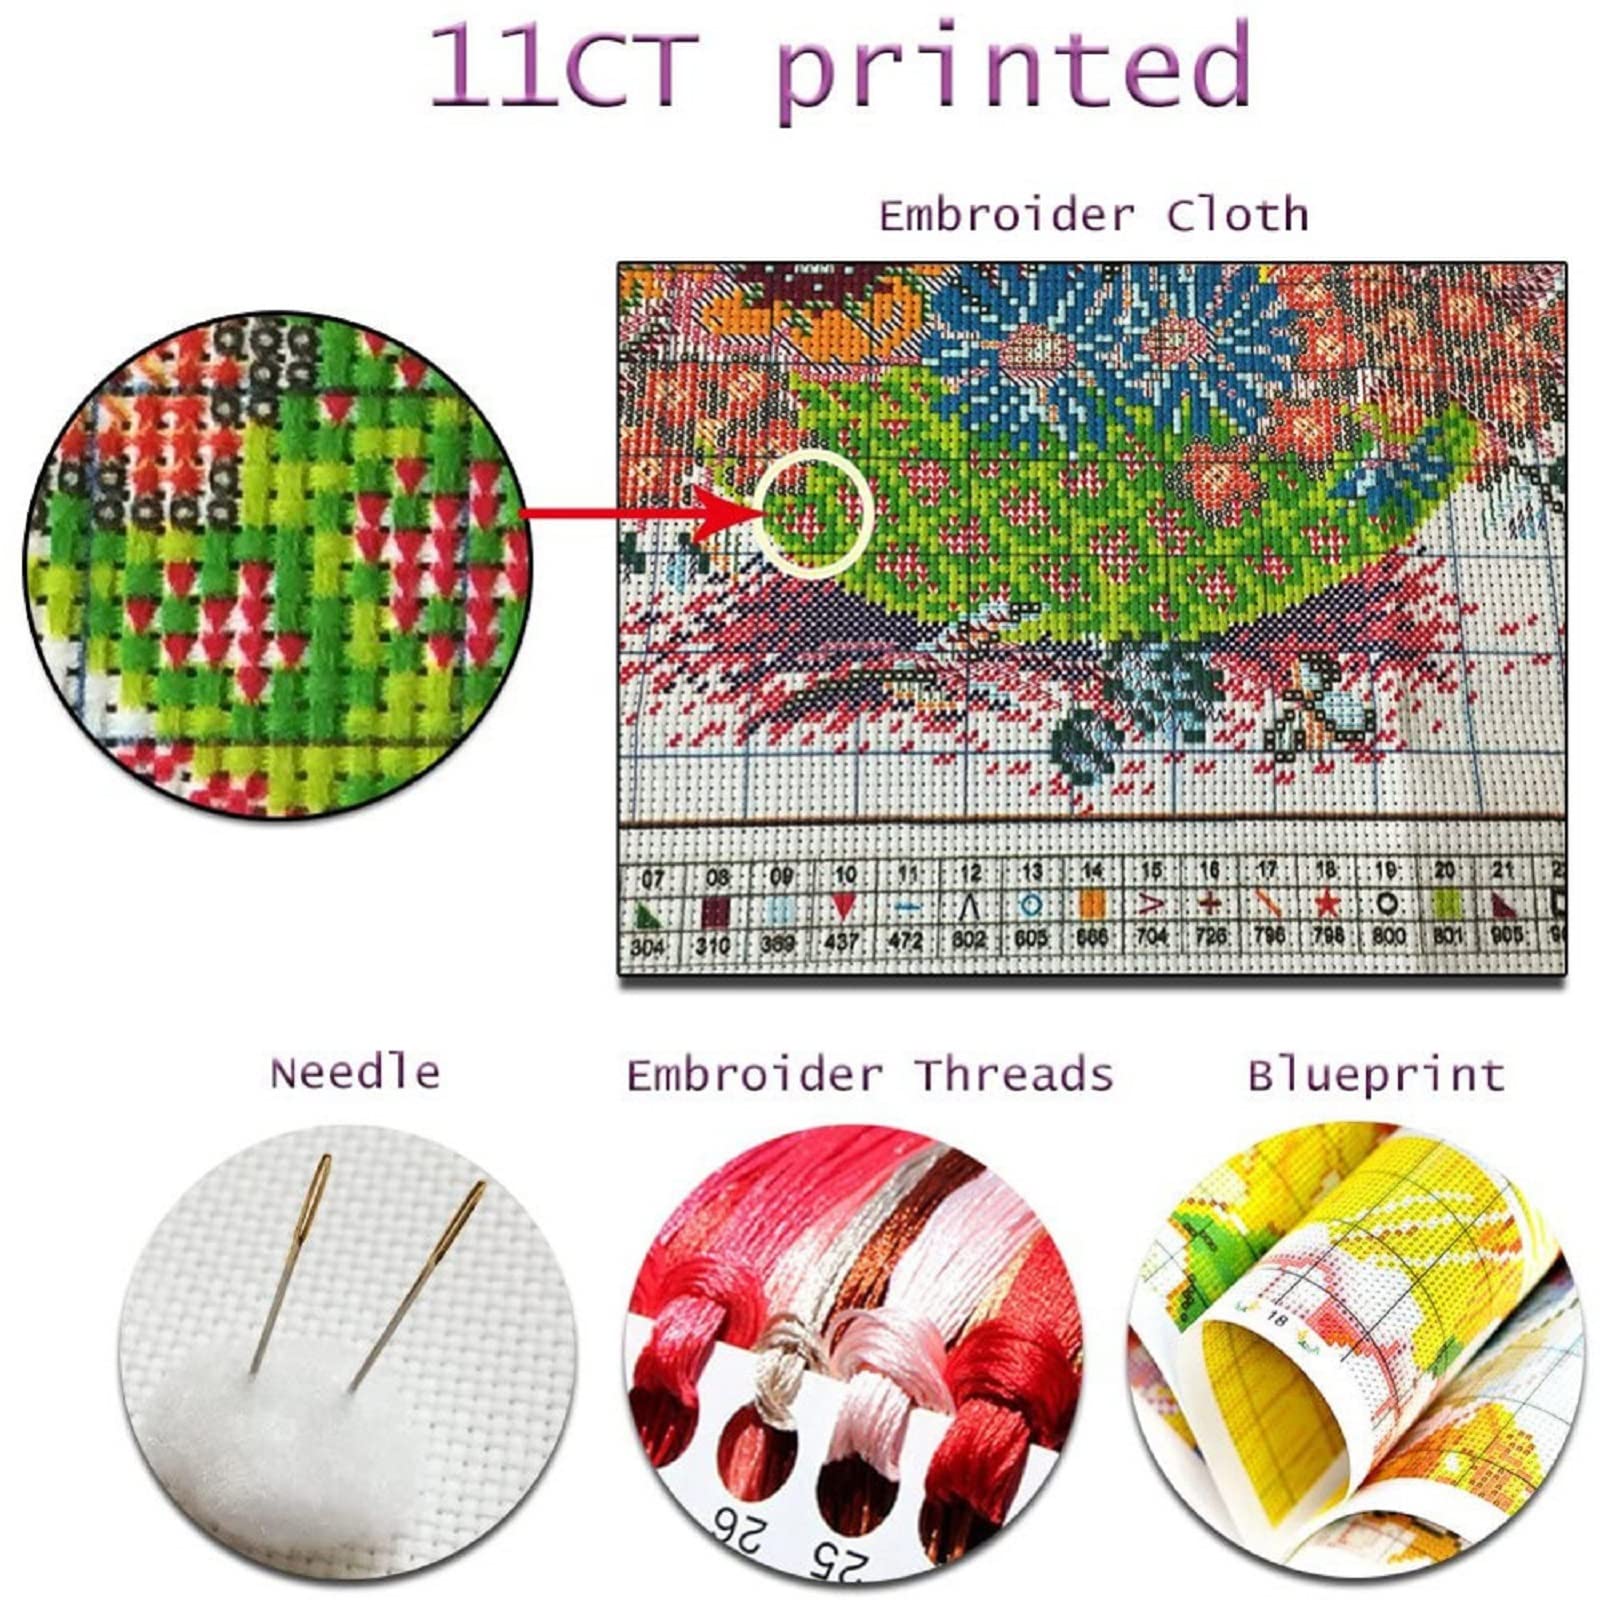 Embroidery Kit for Beginners, DIY Needlepoint Kits with Embroidery